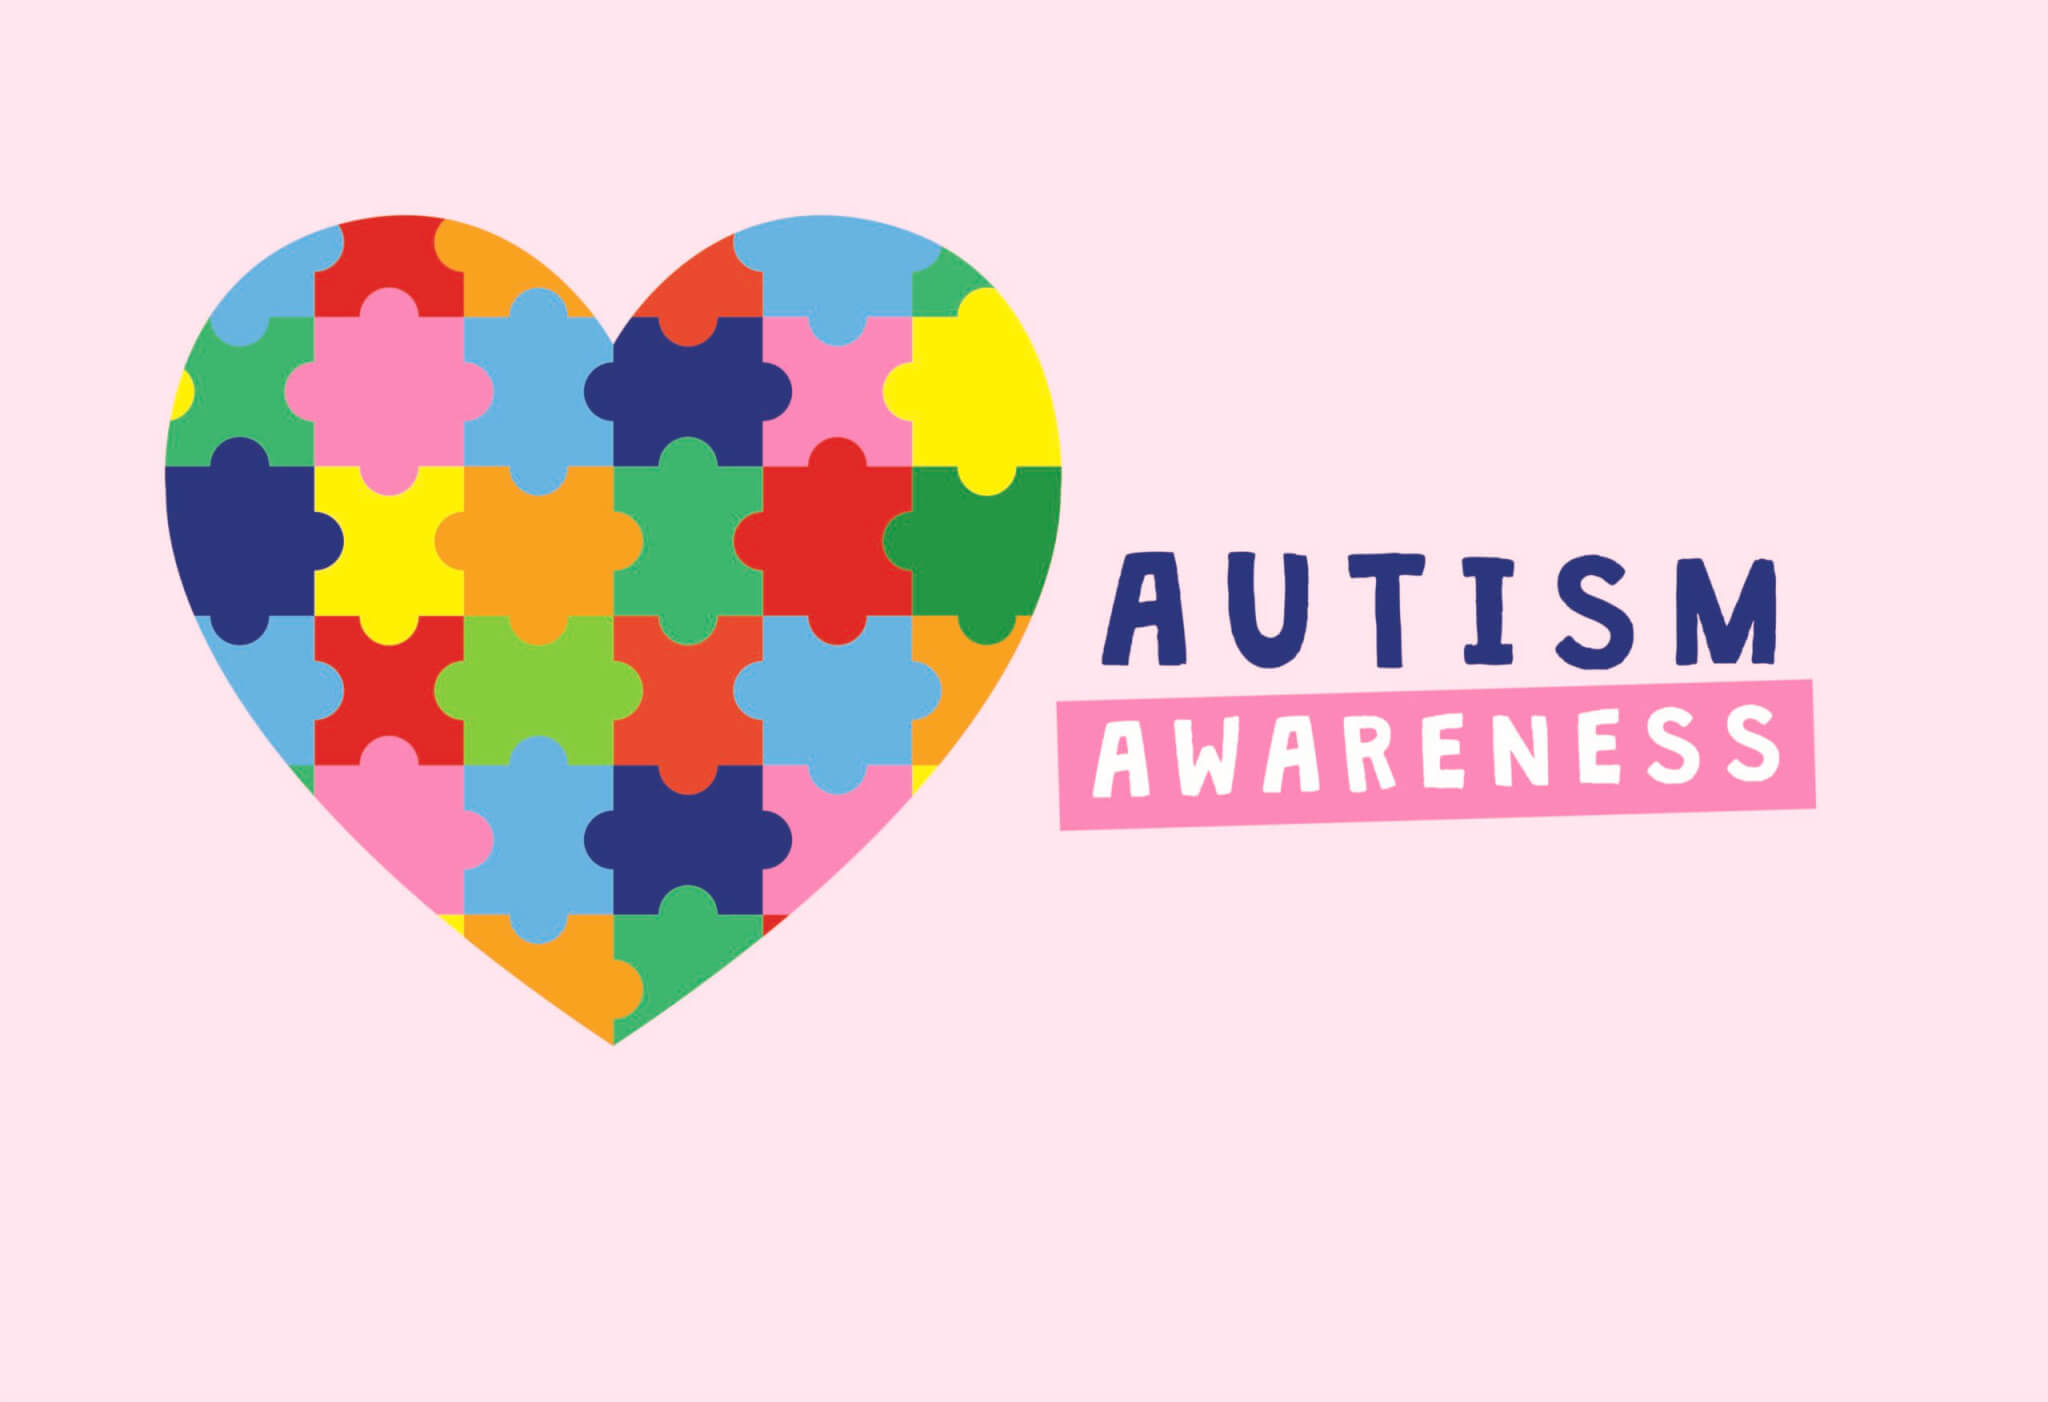 Autism Awareness Poster with Colourful Puzzle Pieces Forming a Heart